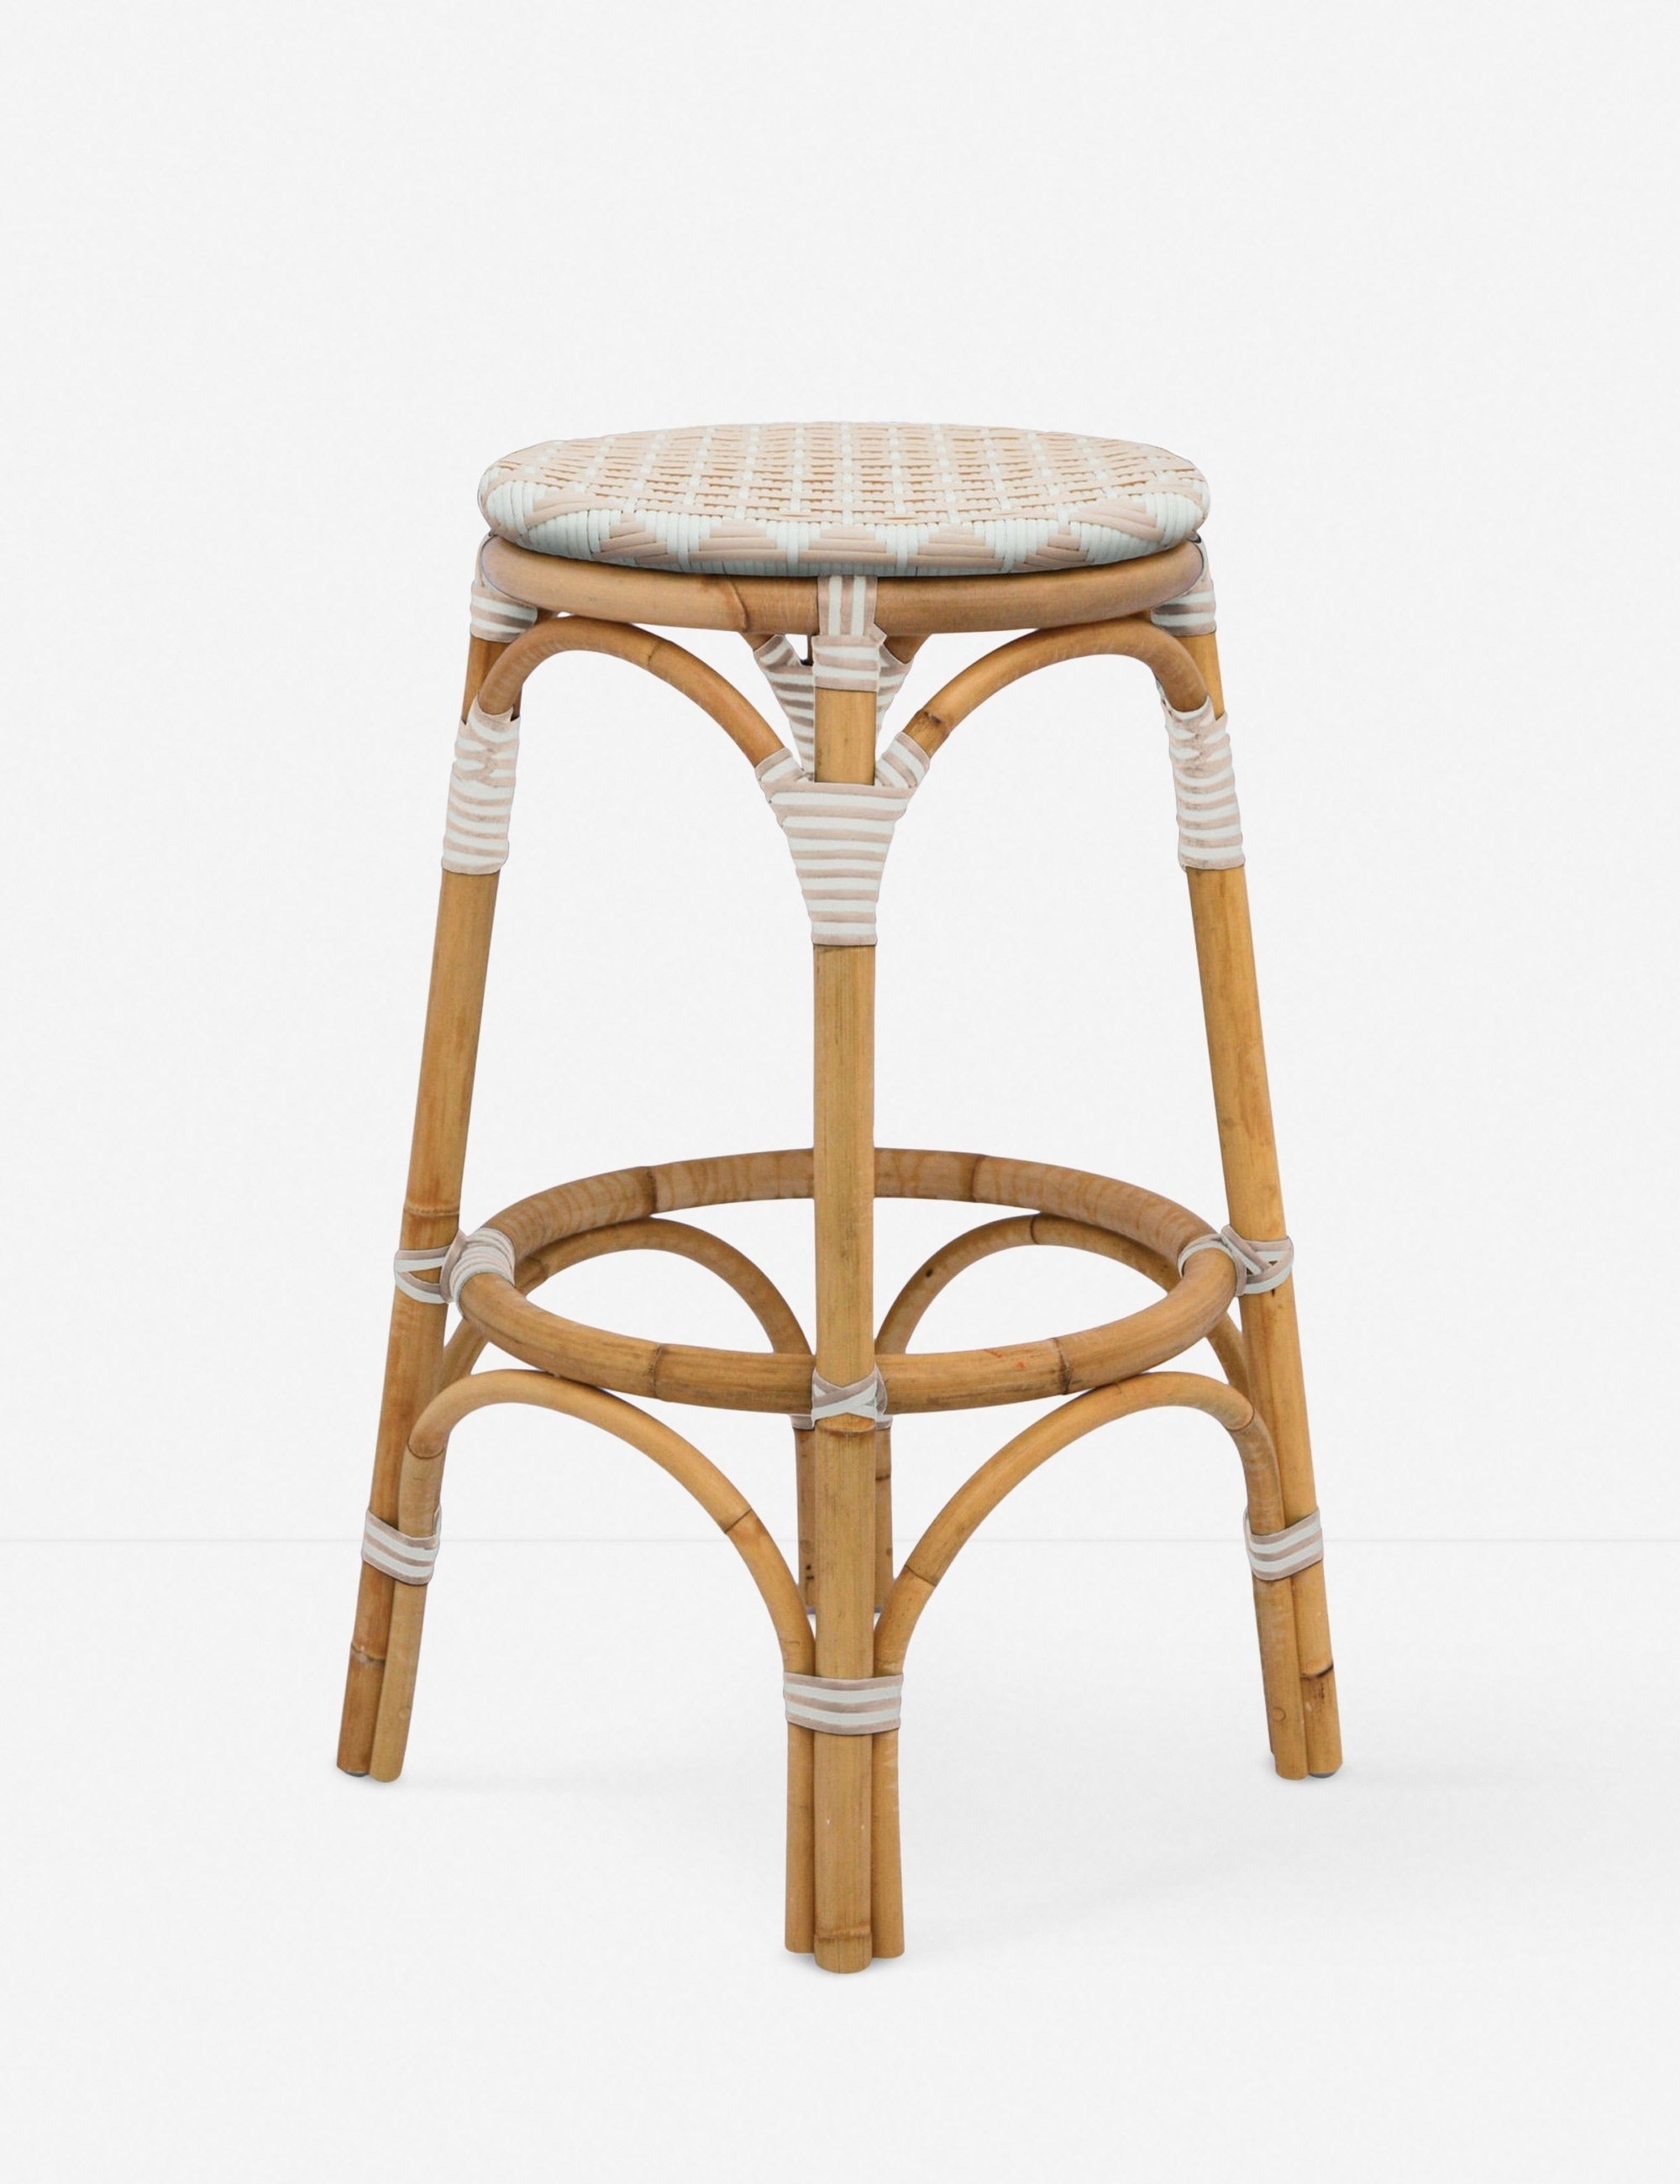 Cayla Indoor / Outdoor Stool, White and Blush Bar